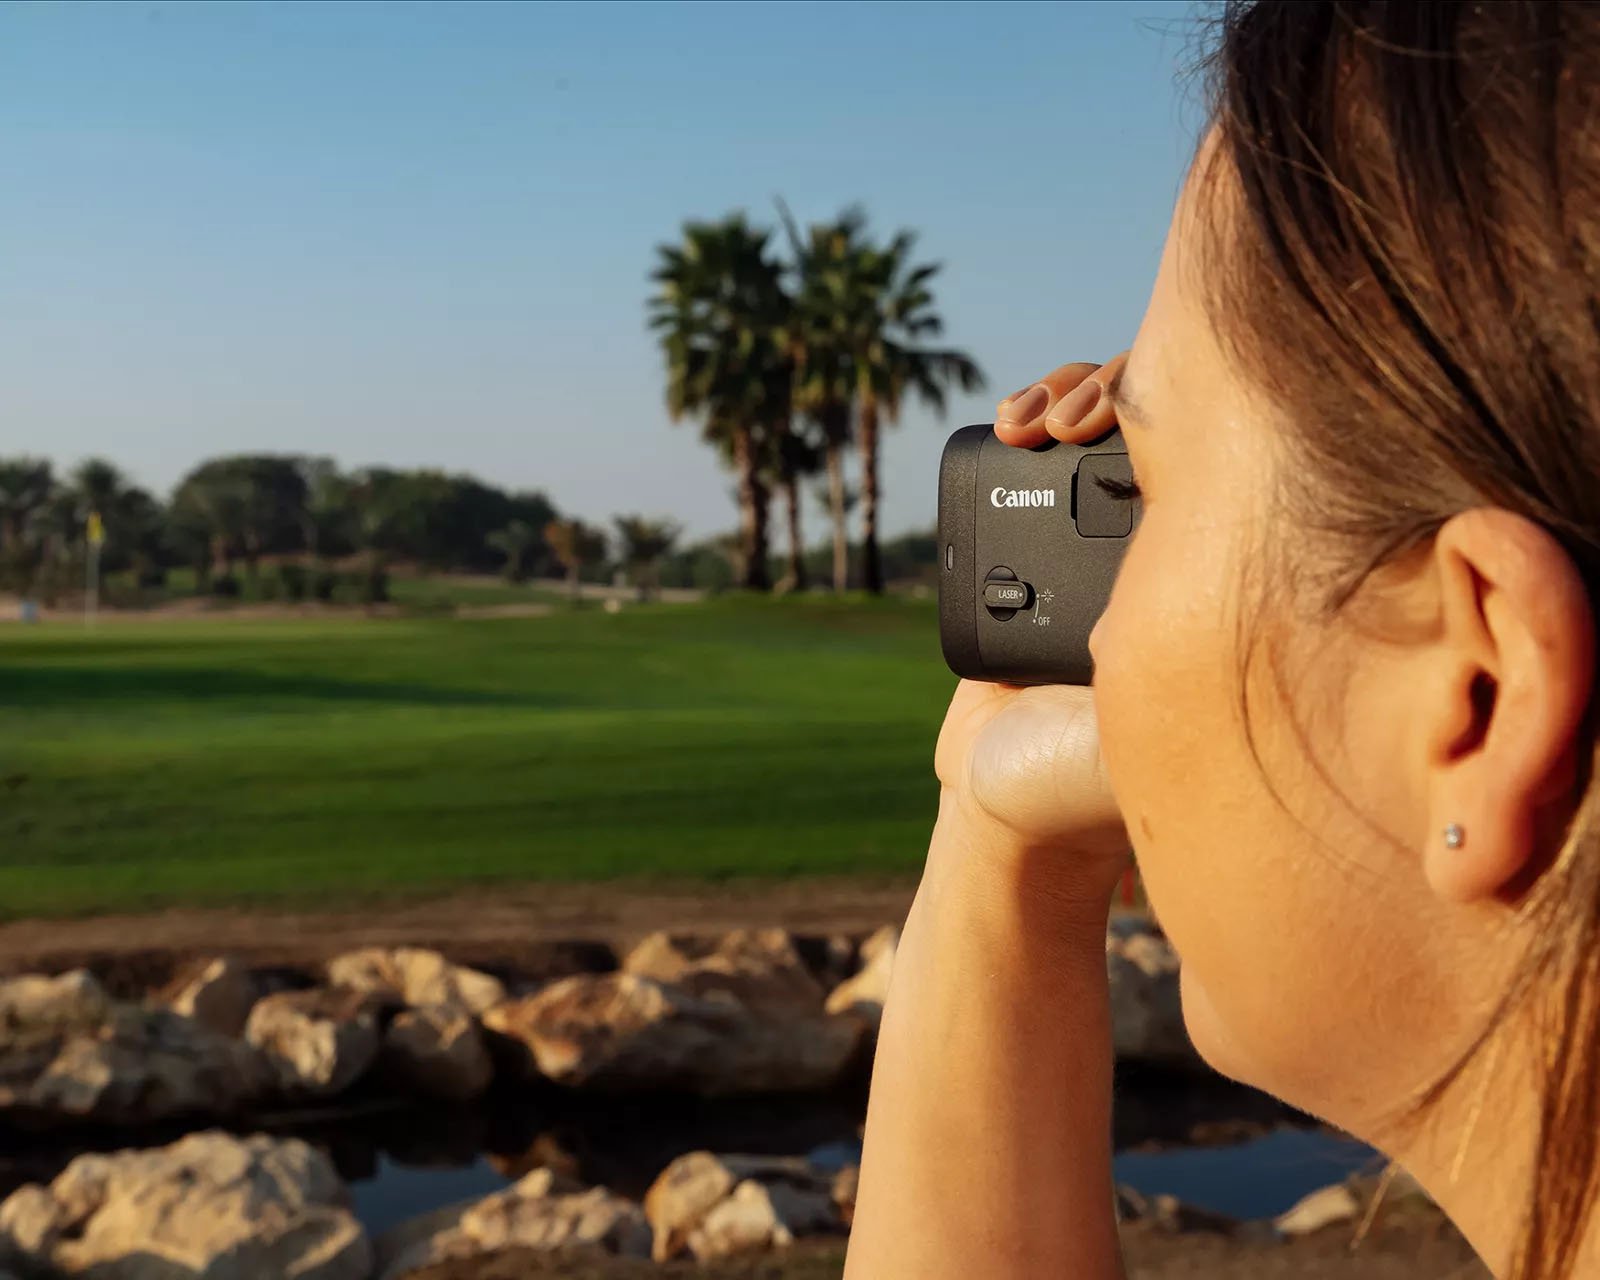 A person with long hair is holding a Canon rangefinder with an outdoor landscape featuring a green field, rocks, and distant palm trees under a clear blue sky. The picture is taken from the side, showing the person focusing on something in the distance.